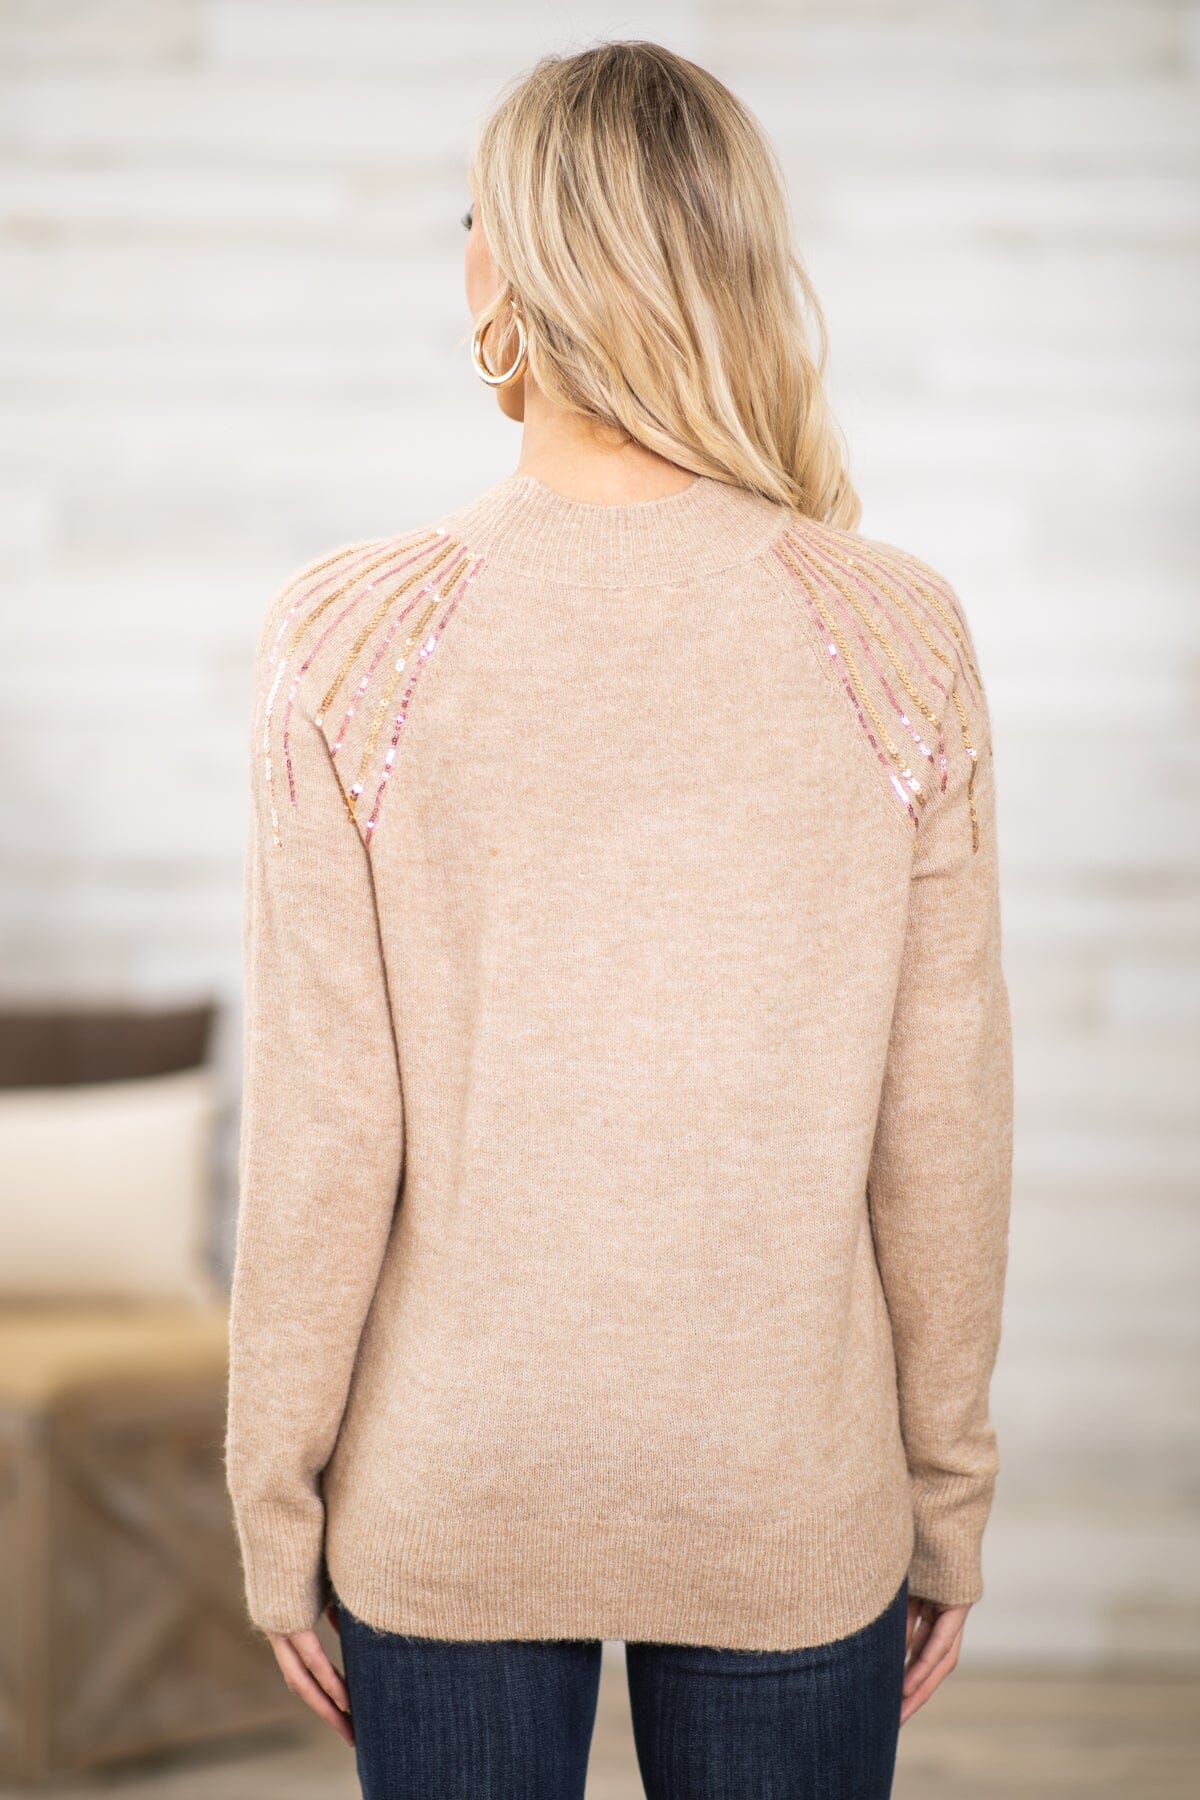 Tan and Rose Gold Sequin Detail Sweater - Filly Flair